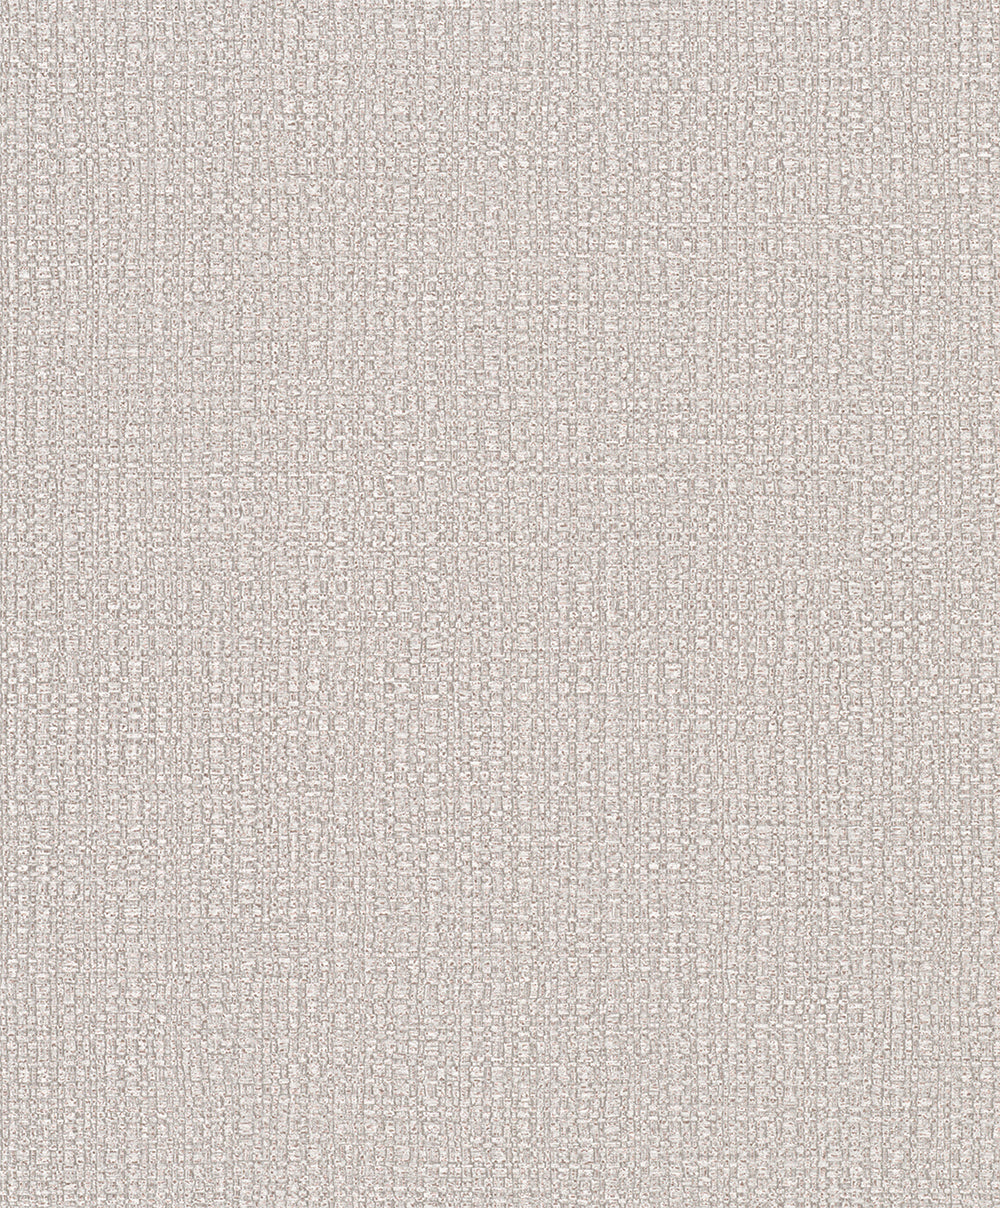 Vintage Deluxe - Textured Bamboo Weave bold wallpaper Marburg Roll Light Taupe  32807